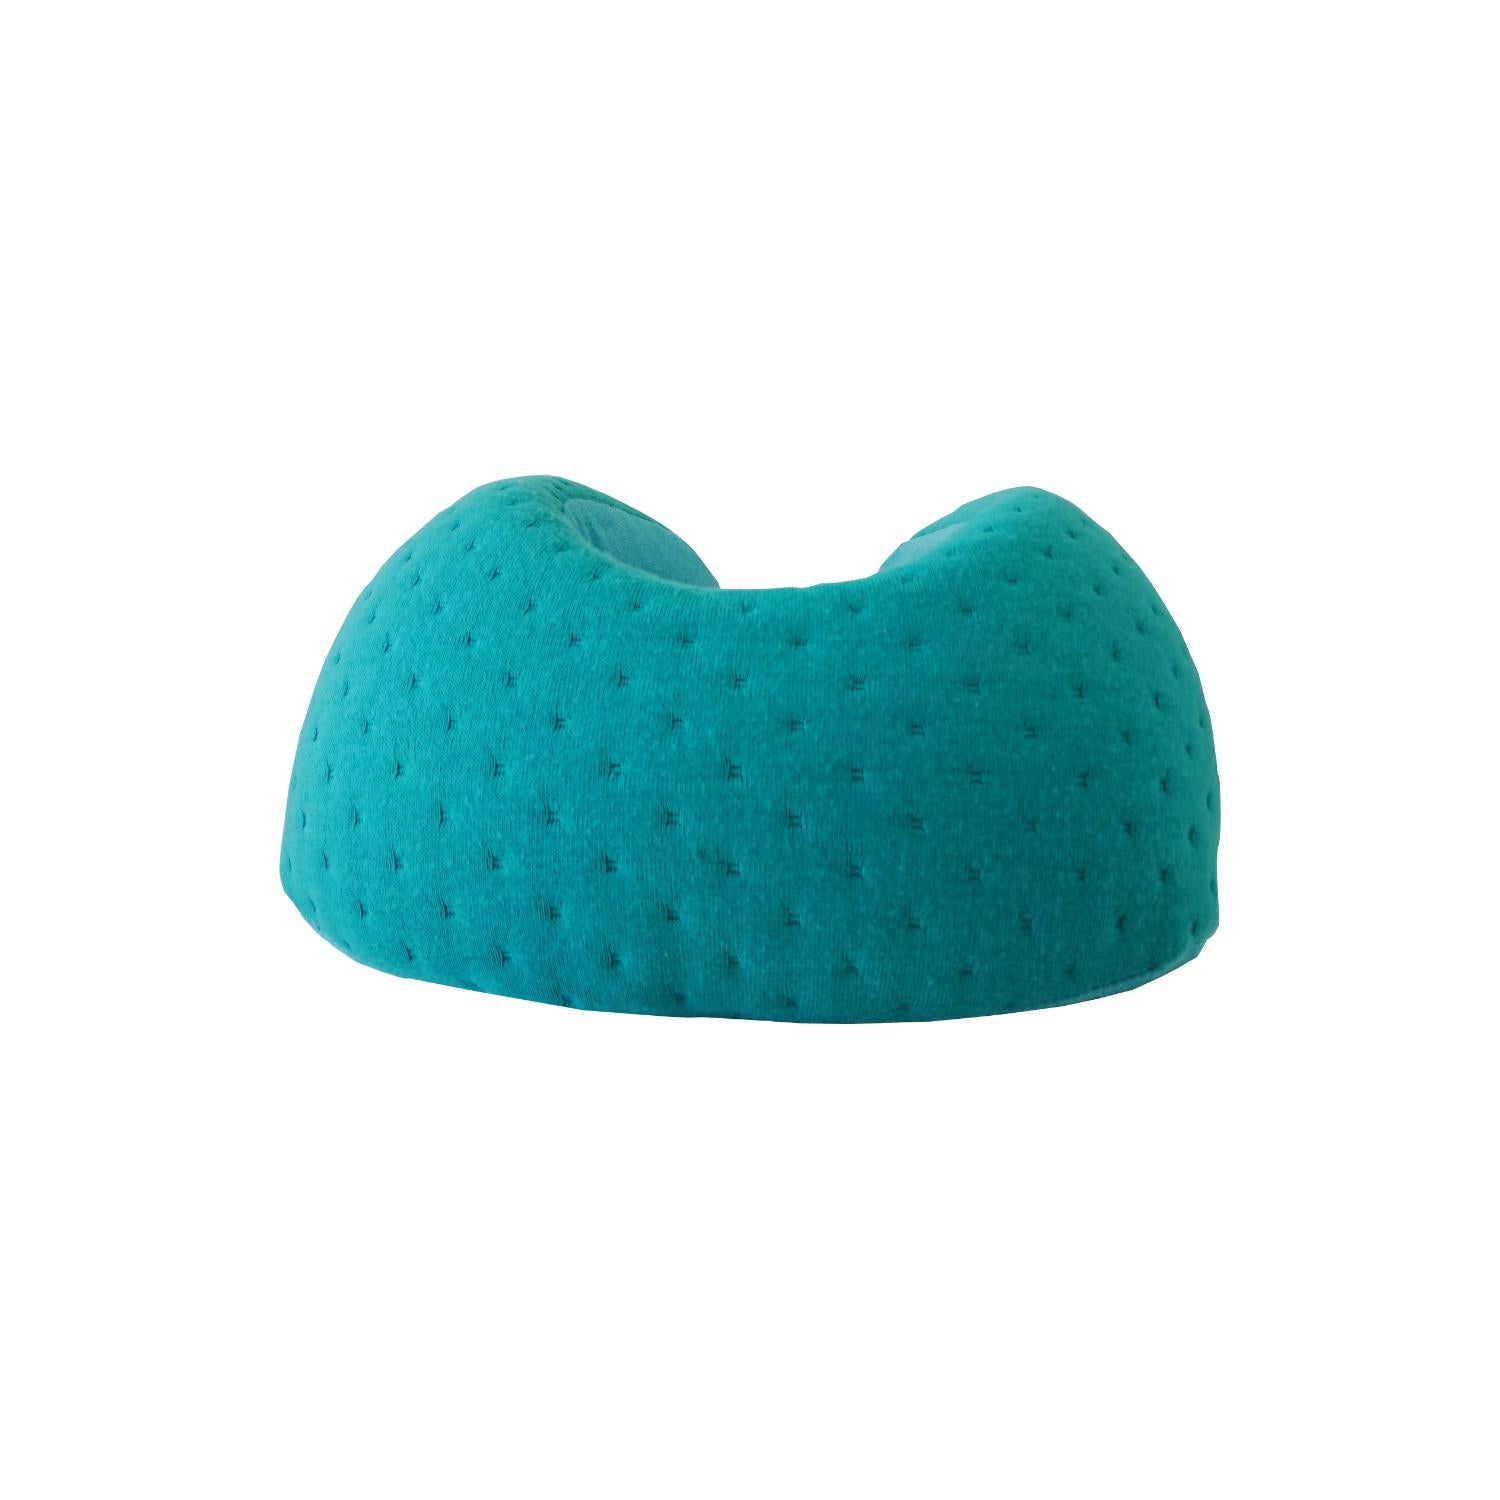 Be Relax My Memory Foam Ultimate Welllness Pillow - Turquoise